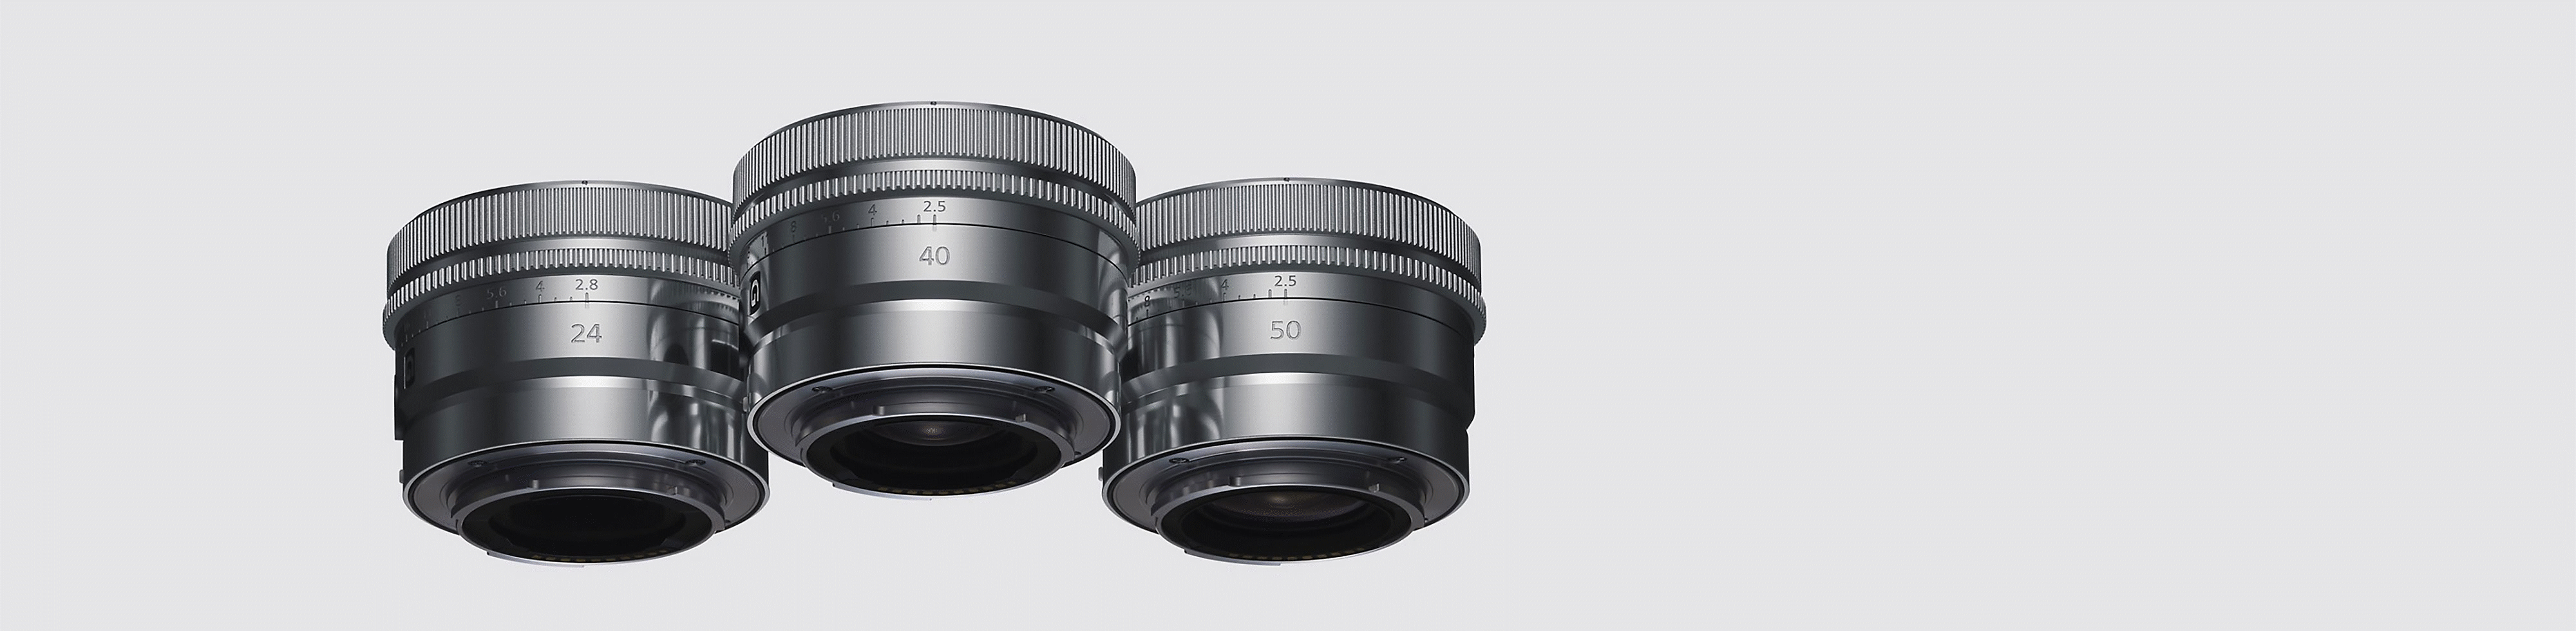 Product image showing metal exterior finish of lens